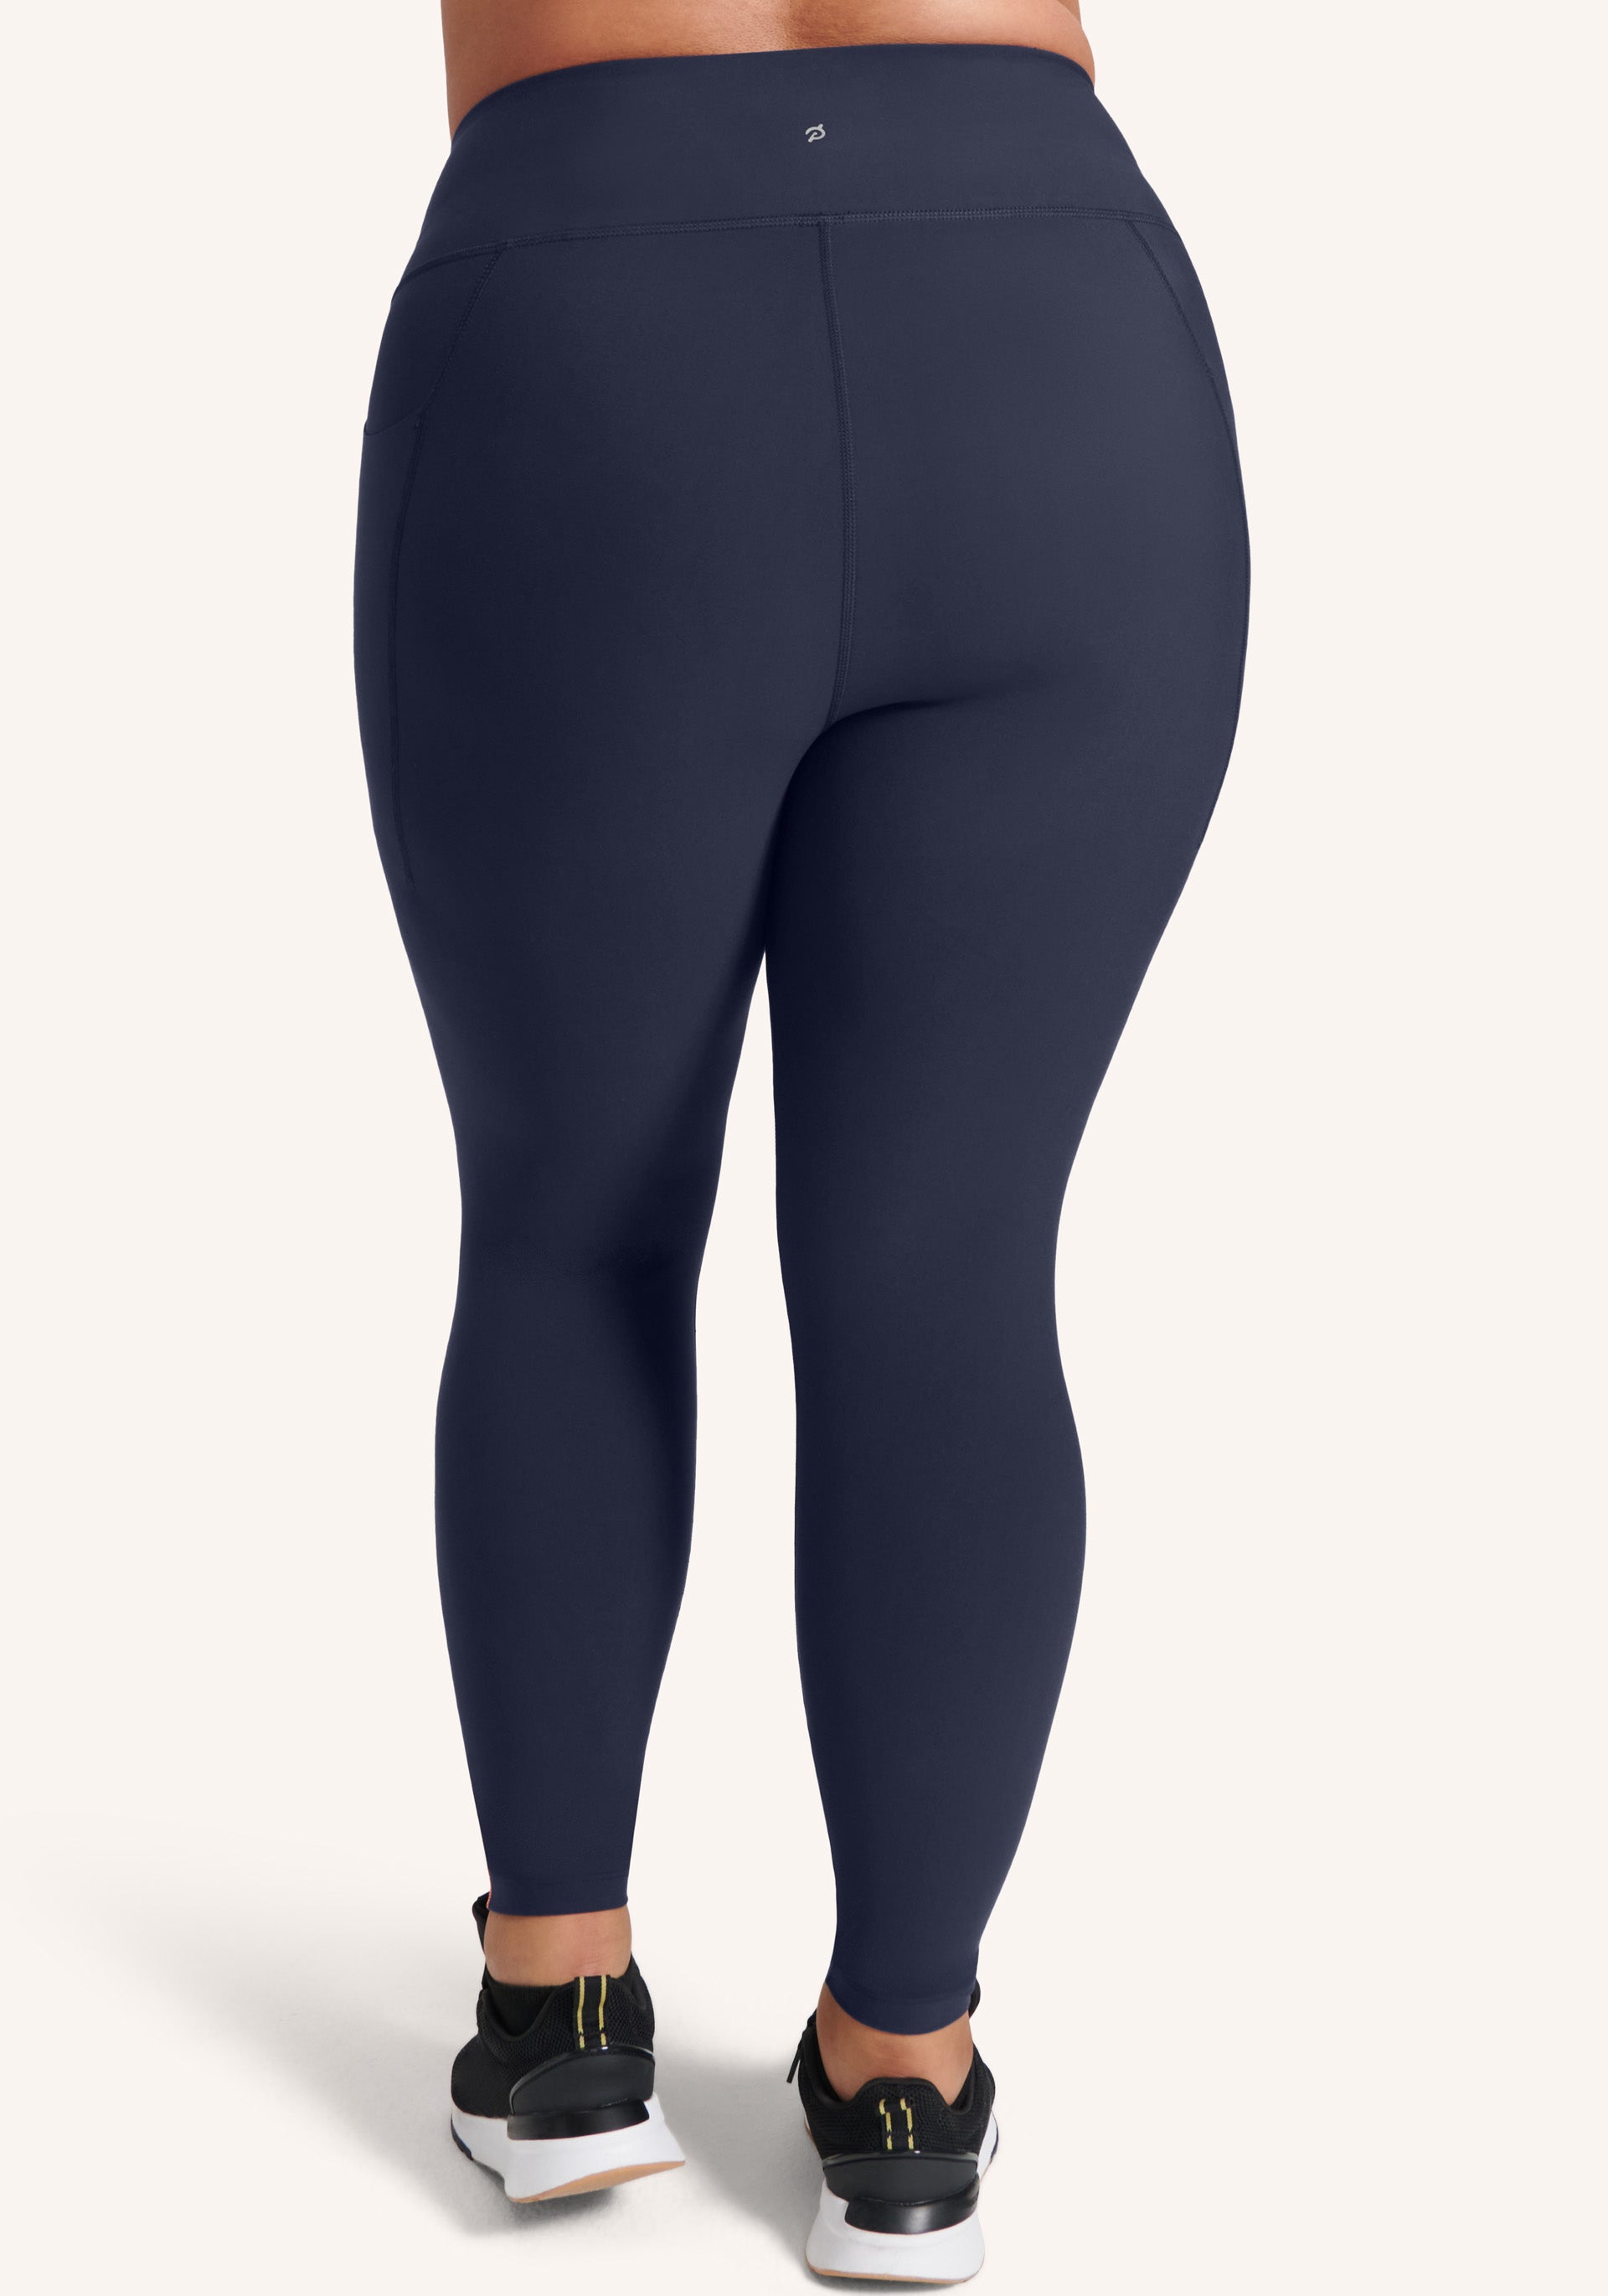 RPET Midnight High-Rise Pocket Legging - COUTONIC